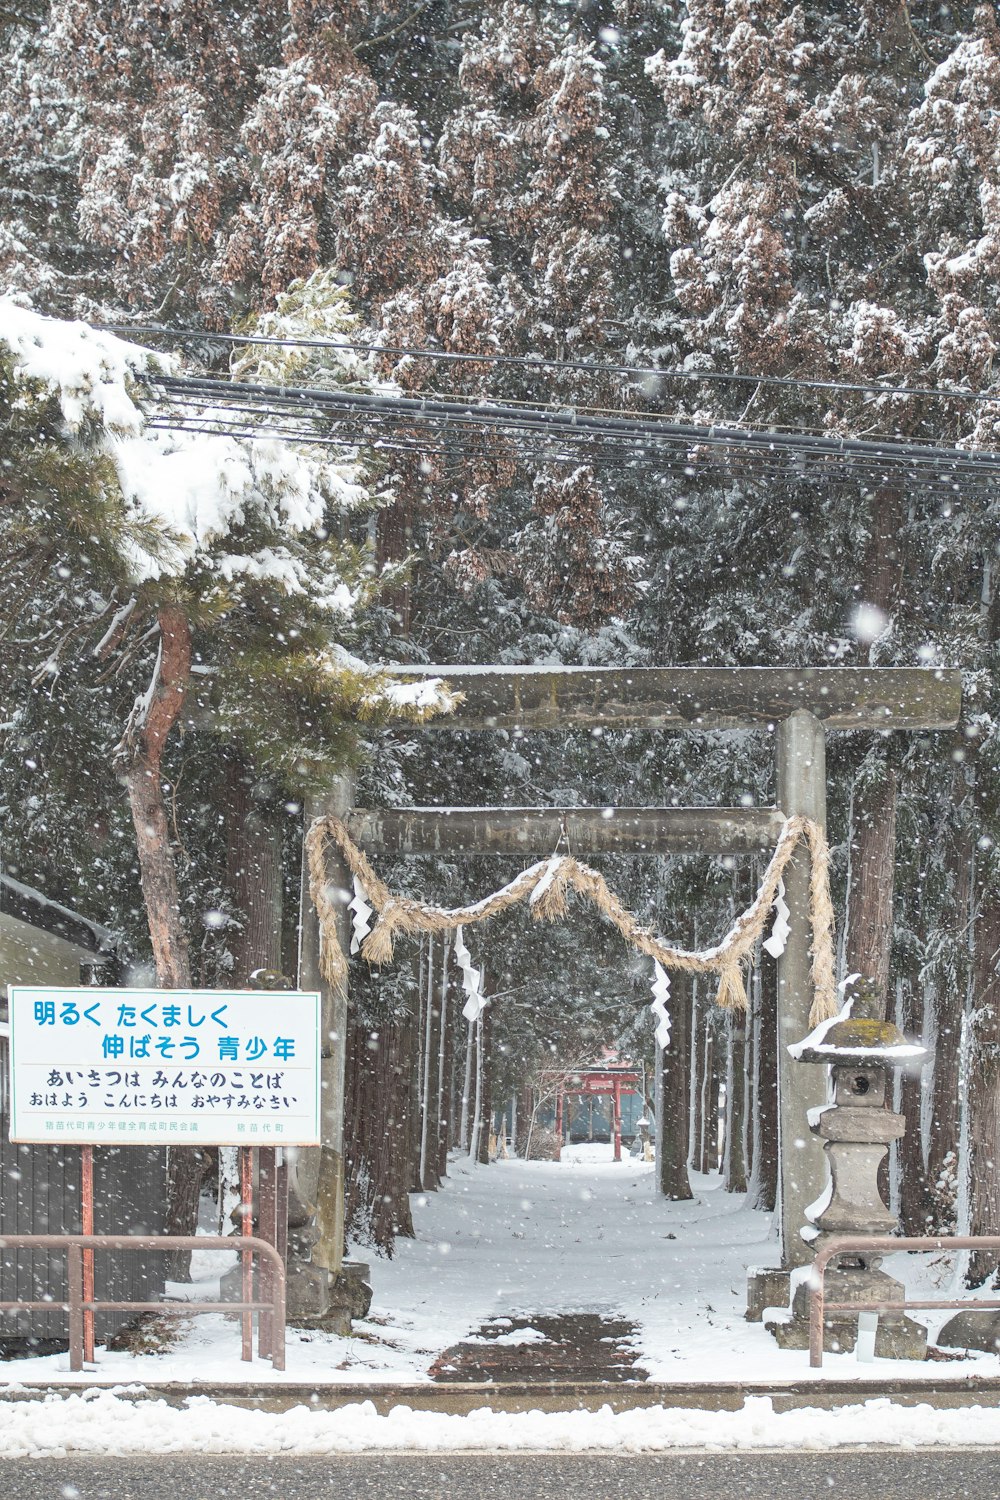 a snowy street with a sign and trees